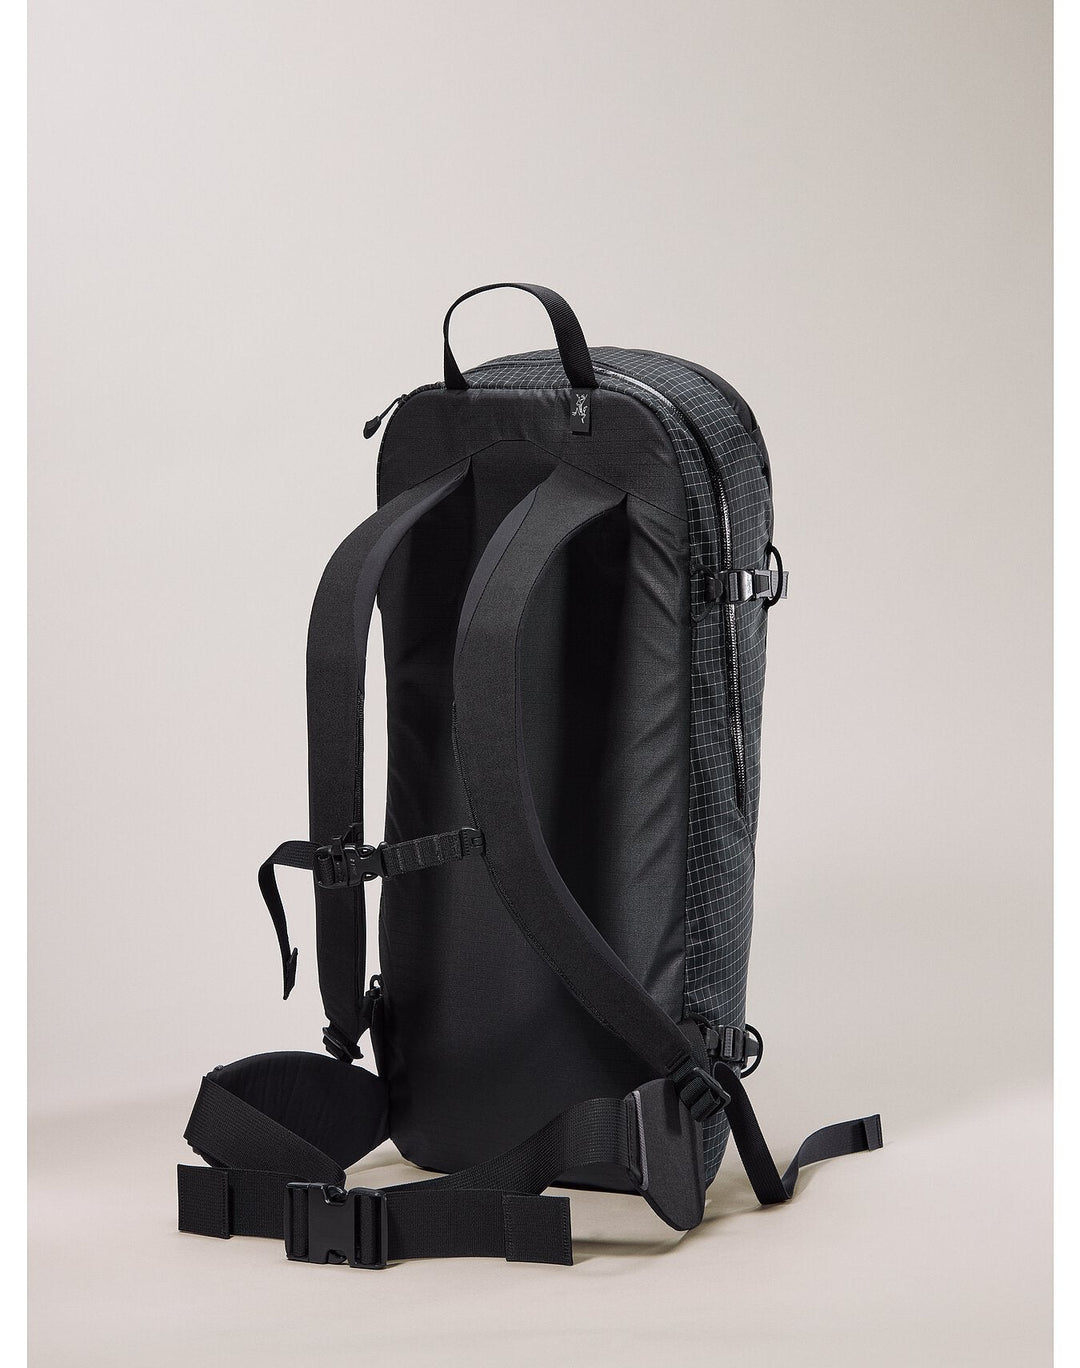 Micon 16 Backpack - Blogside